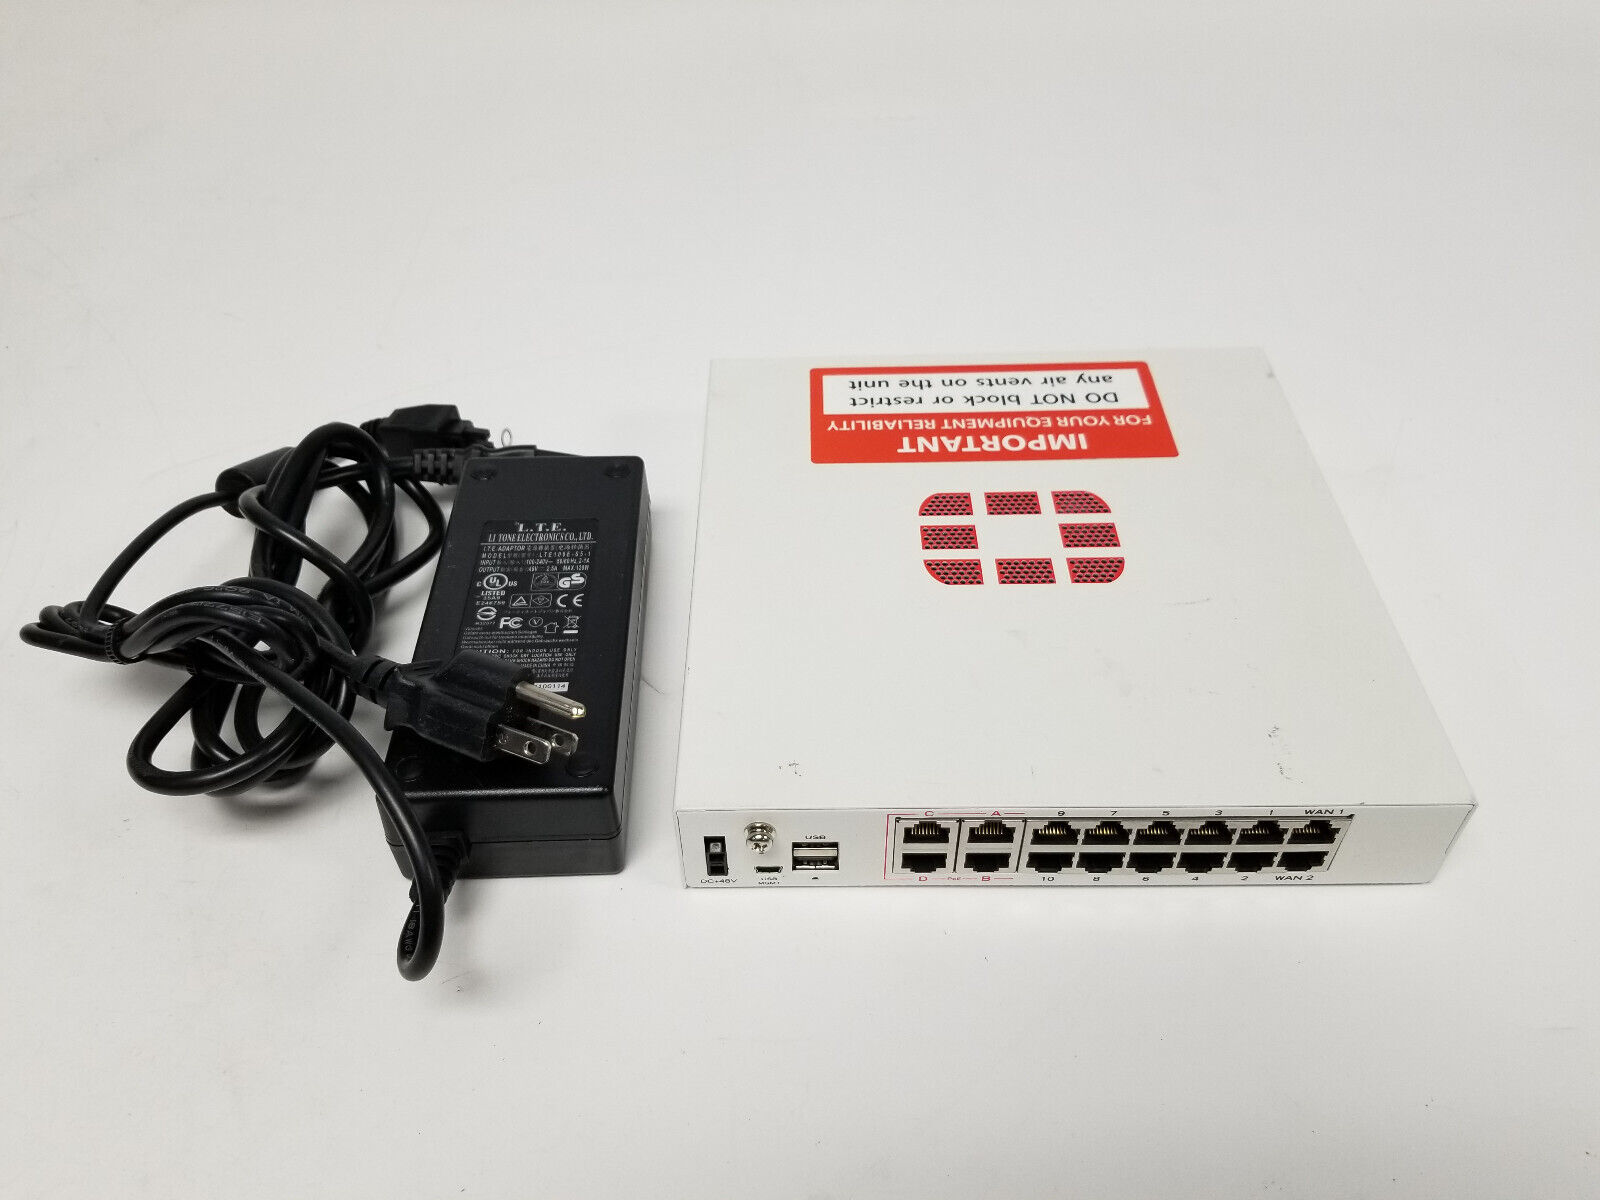 Fortinet FortiGate FG-90D-POE Firewall Security Applicance with Power Adapter